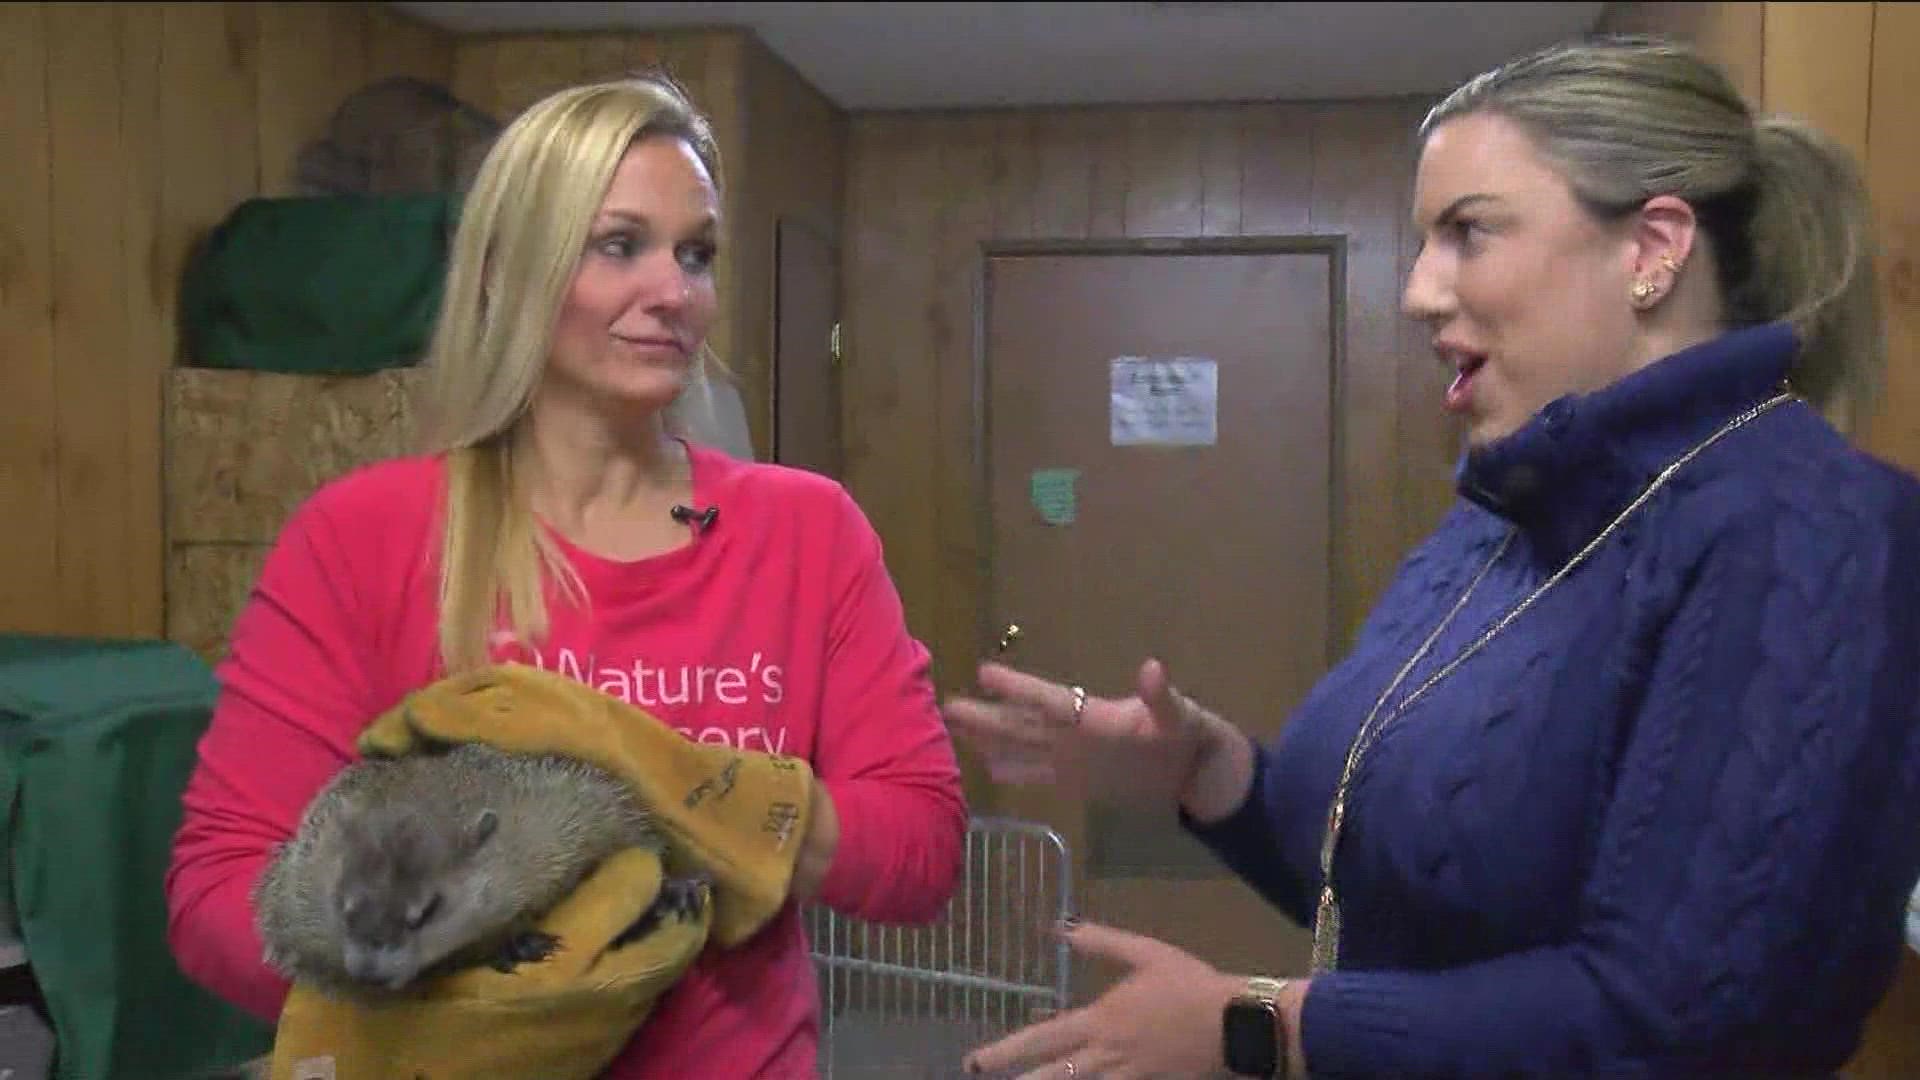 The annual Giving Tuesday fundraiser is key for nonprofits like Nature's Nursery, especially as the wildlife rehab group is raising money for a new building.